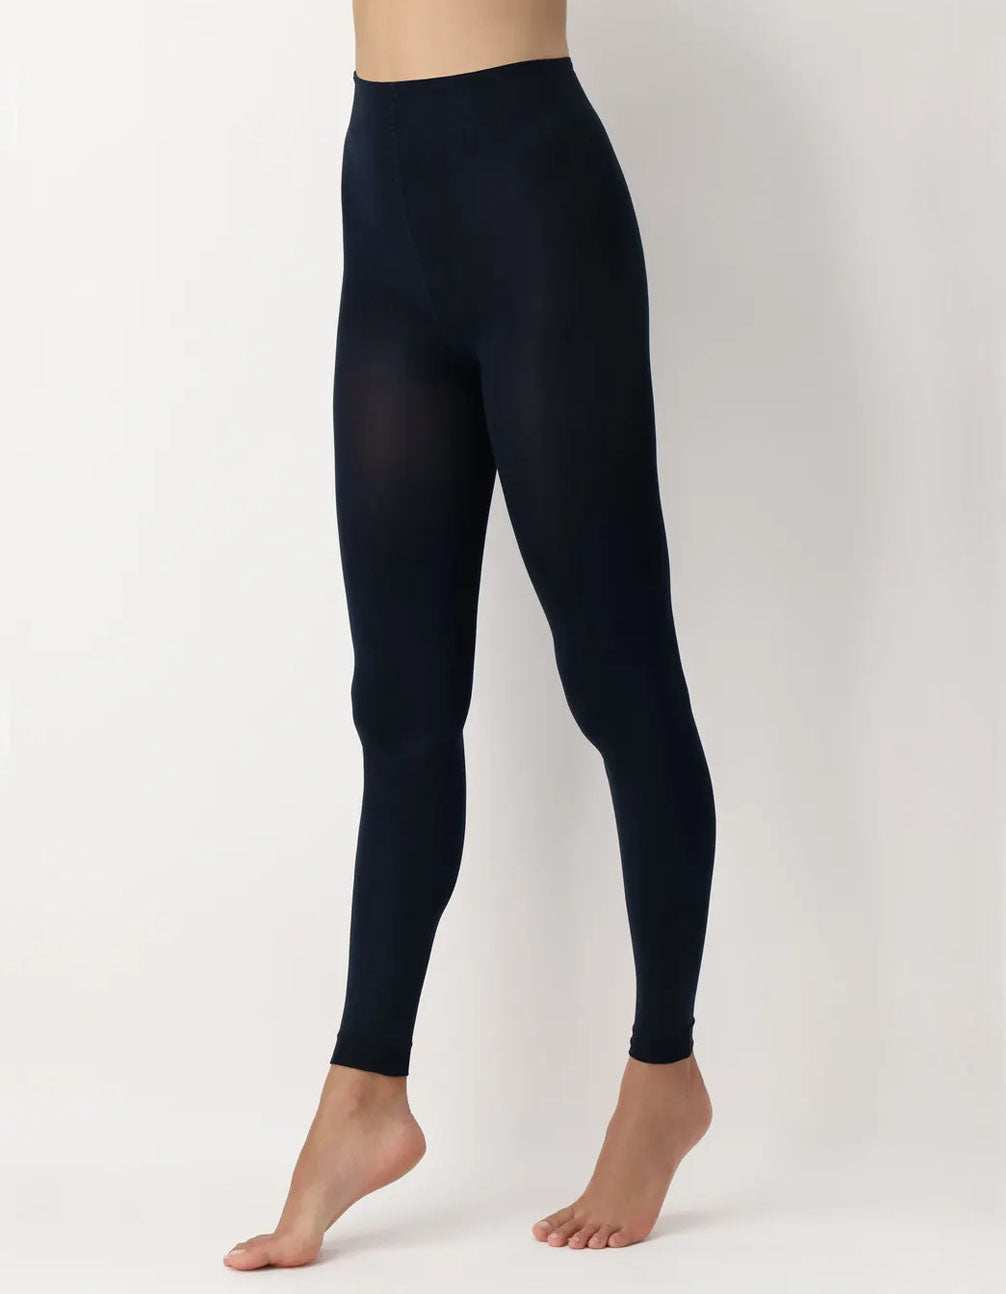 Oroblù All Colors 120 Leggings - Navy ultra opaque soft matte footless tights with flat seams, gusset and deep waist band.